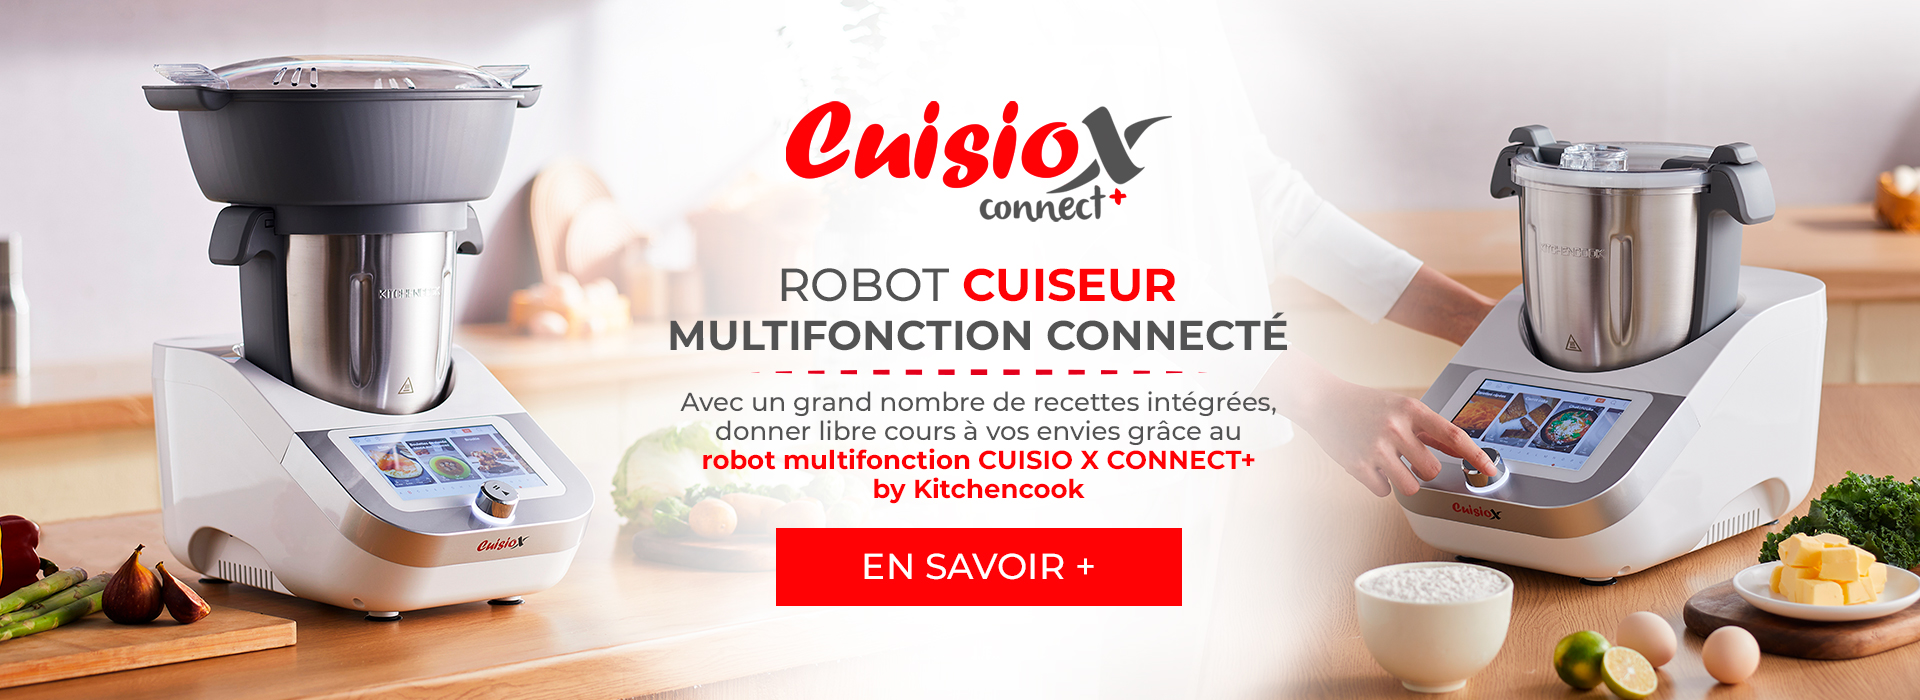 cuisio x connect +